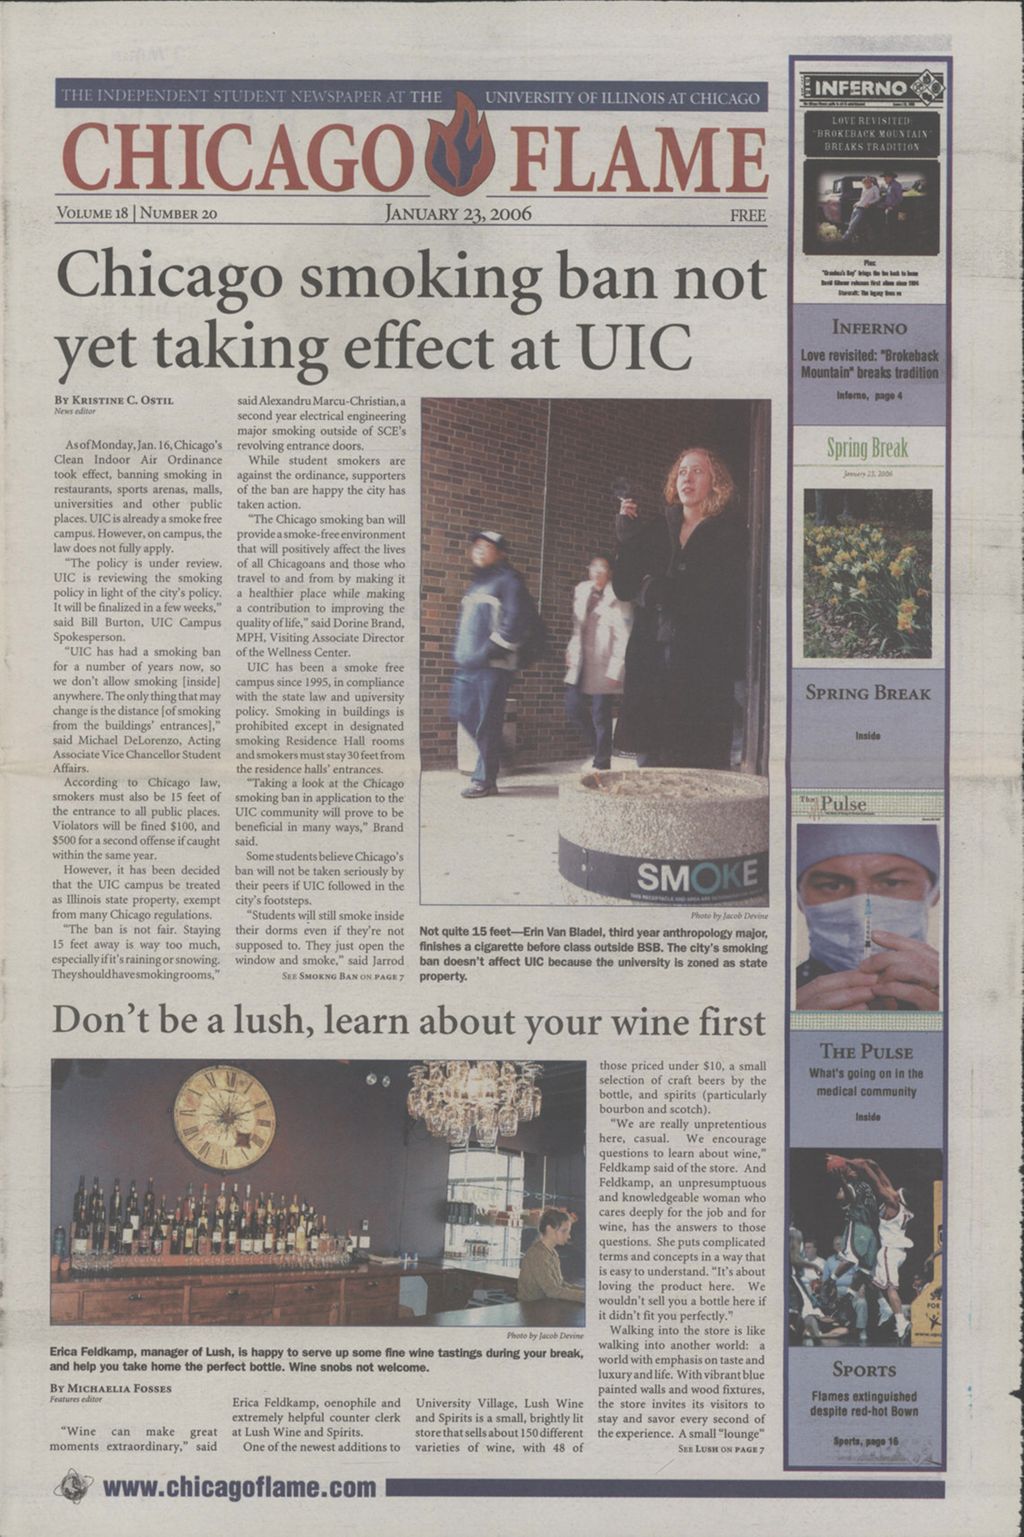 Miniature of Chicago Flame (January 23, 2006)